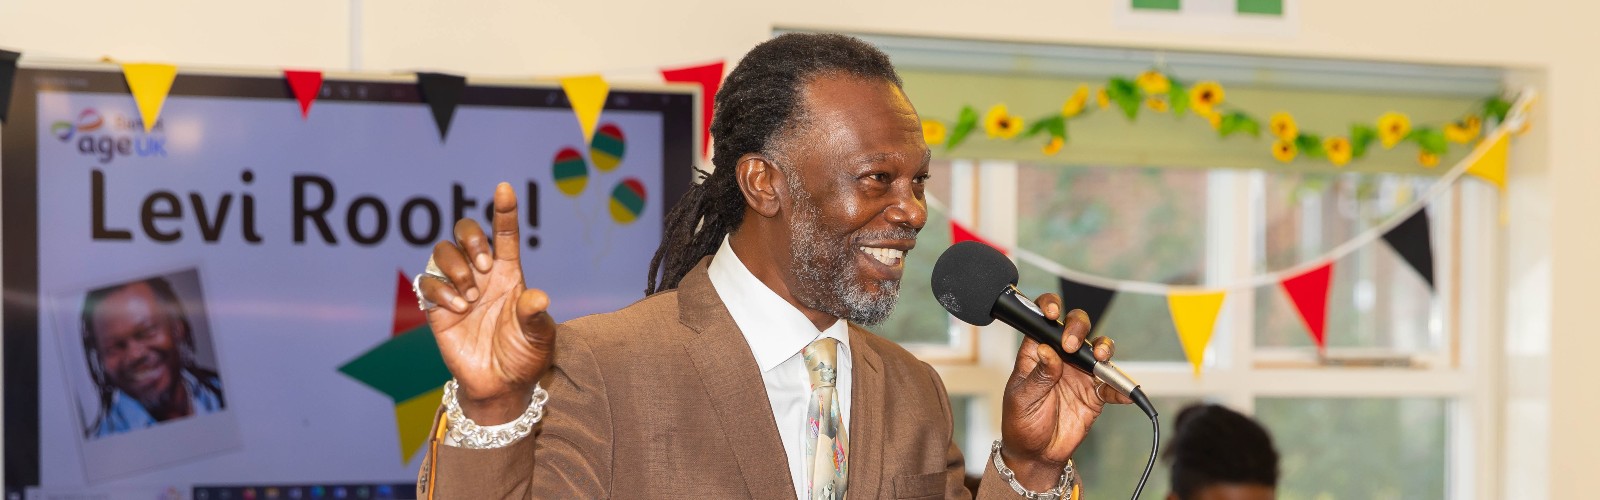 Levi Roots, smiling and holding a microphone